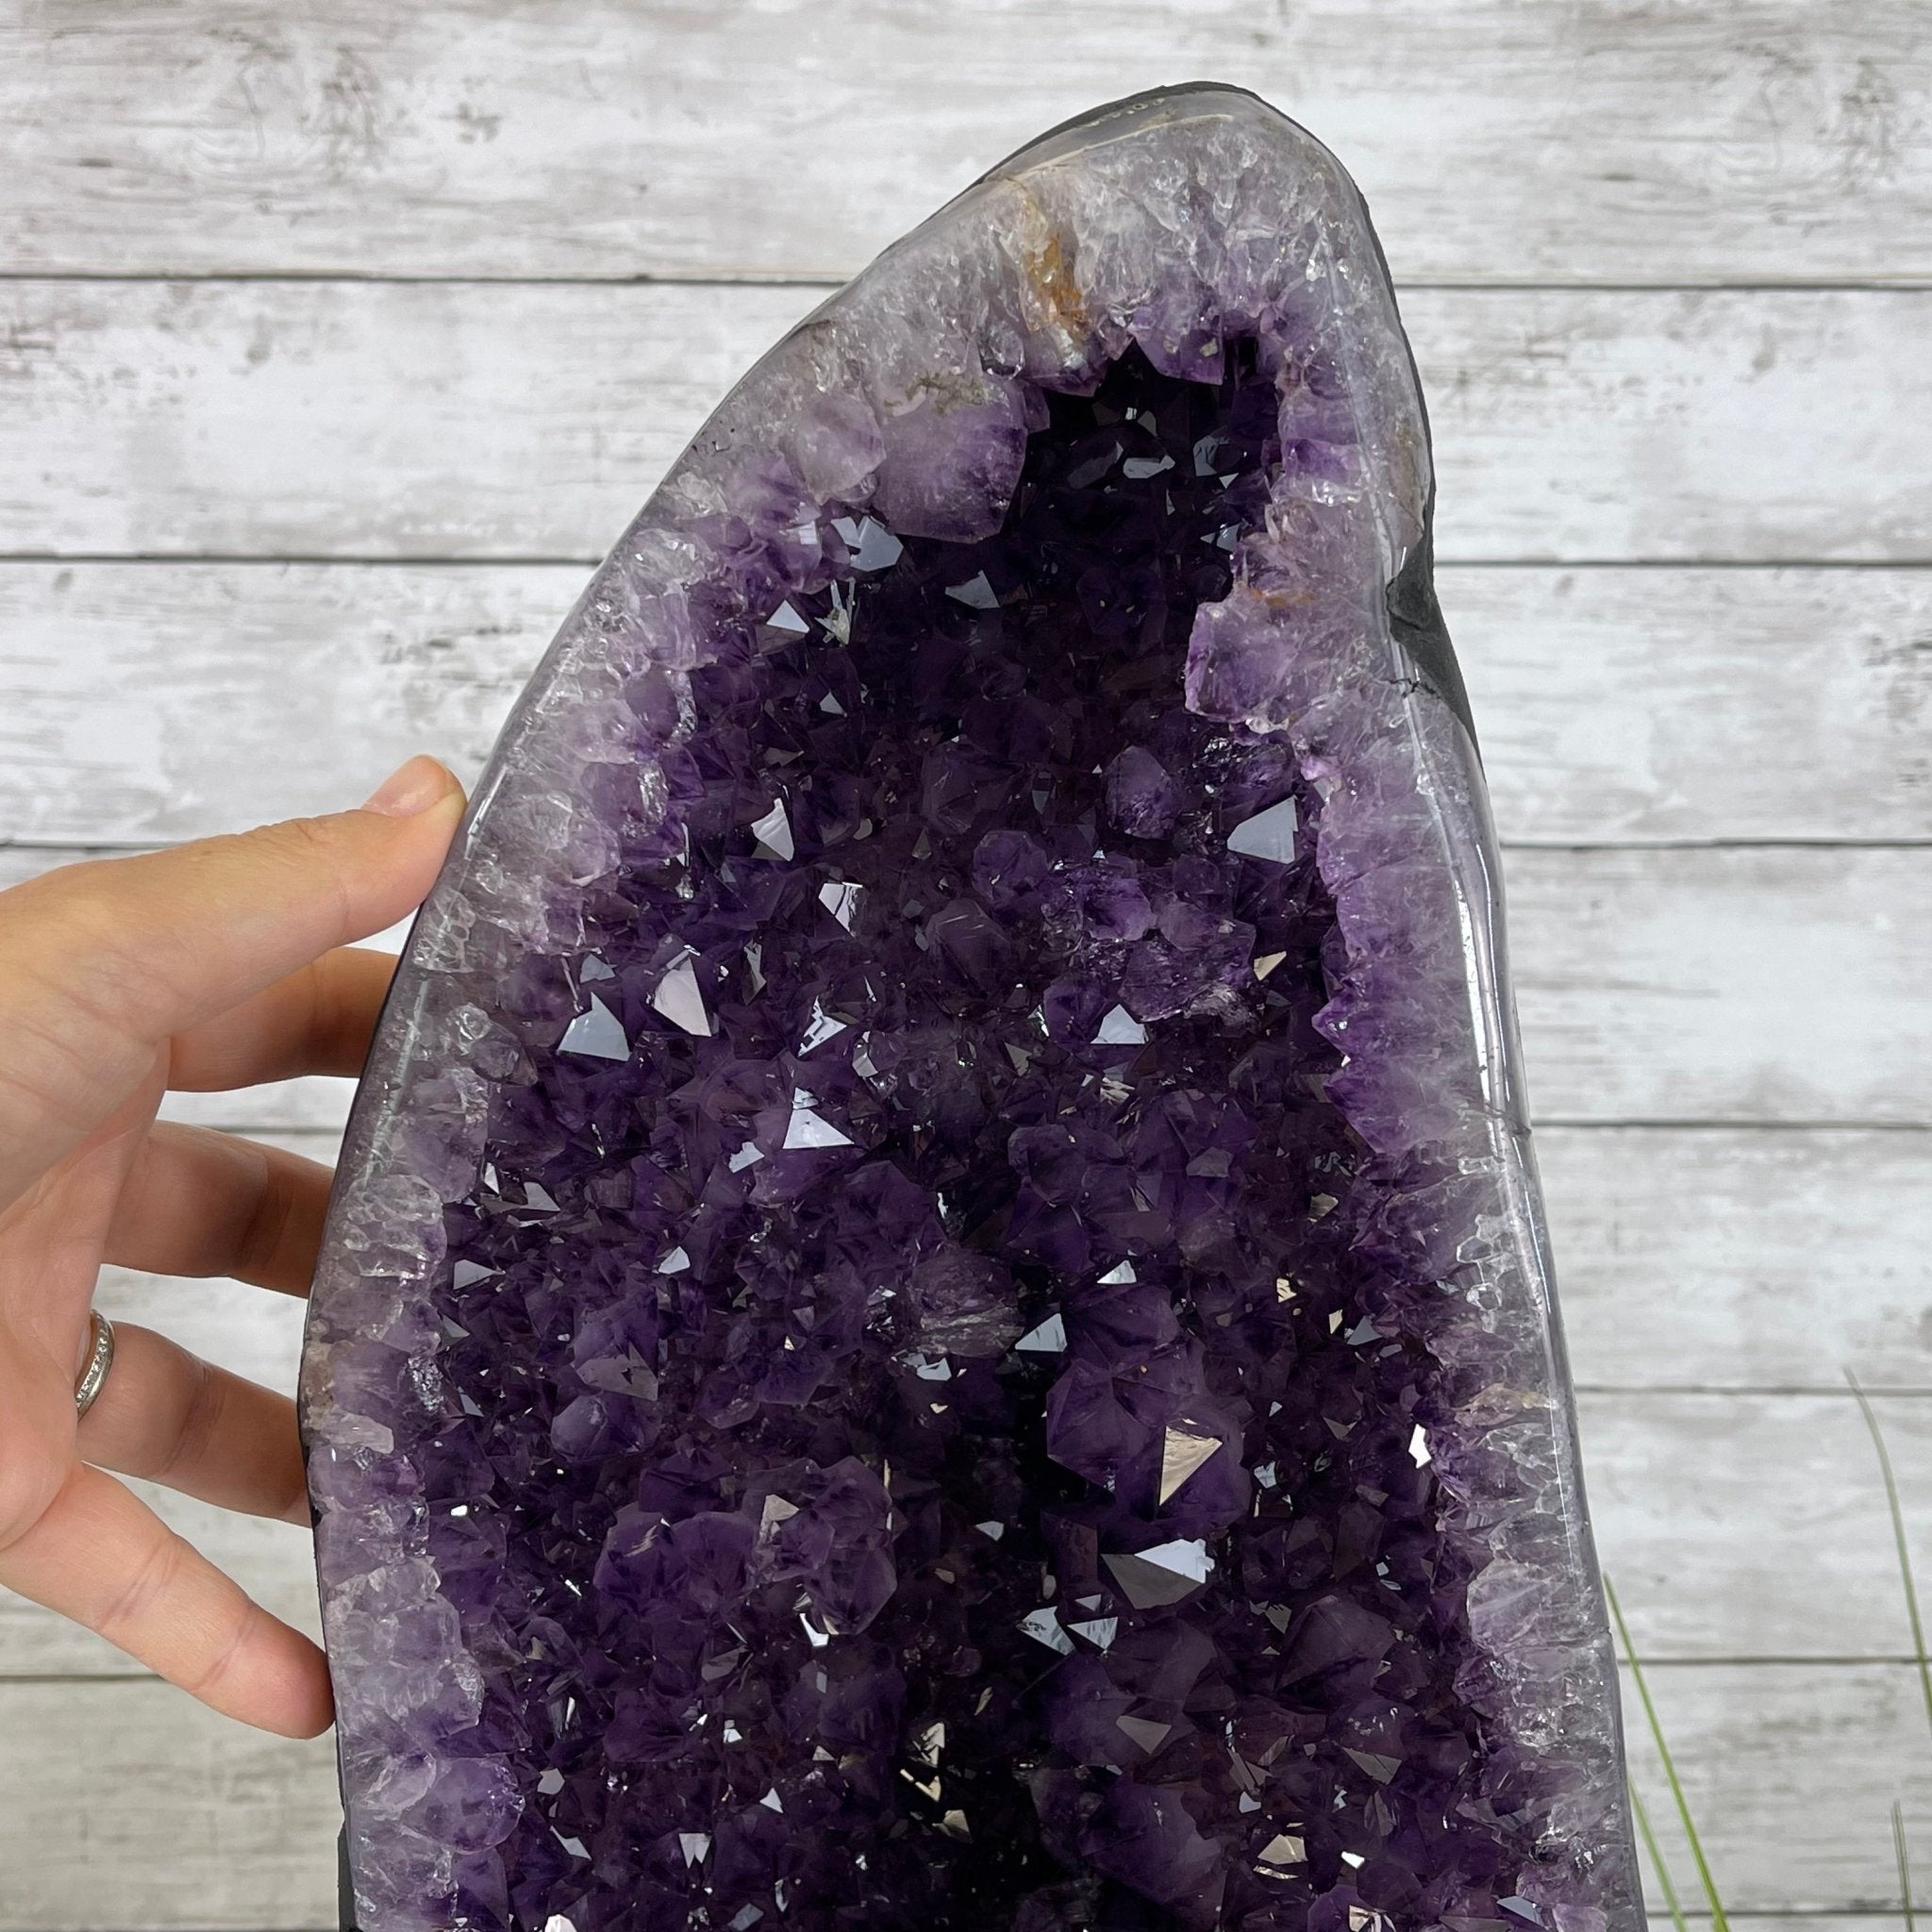 Super Quality Brazilian Amethyst Cathedral, 49.3 lbs & 22.5" Tall #5601-1047 by Brazil Gems - Brazil GemsBrazil GemsSuper Quality Brazilian Amethyst Cathedral, 49.3 lbs & 22.5" Tall #5601-1047 by Brazil GemsCathedrals5601-1047